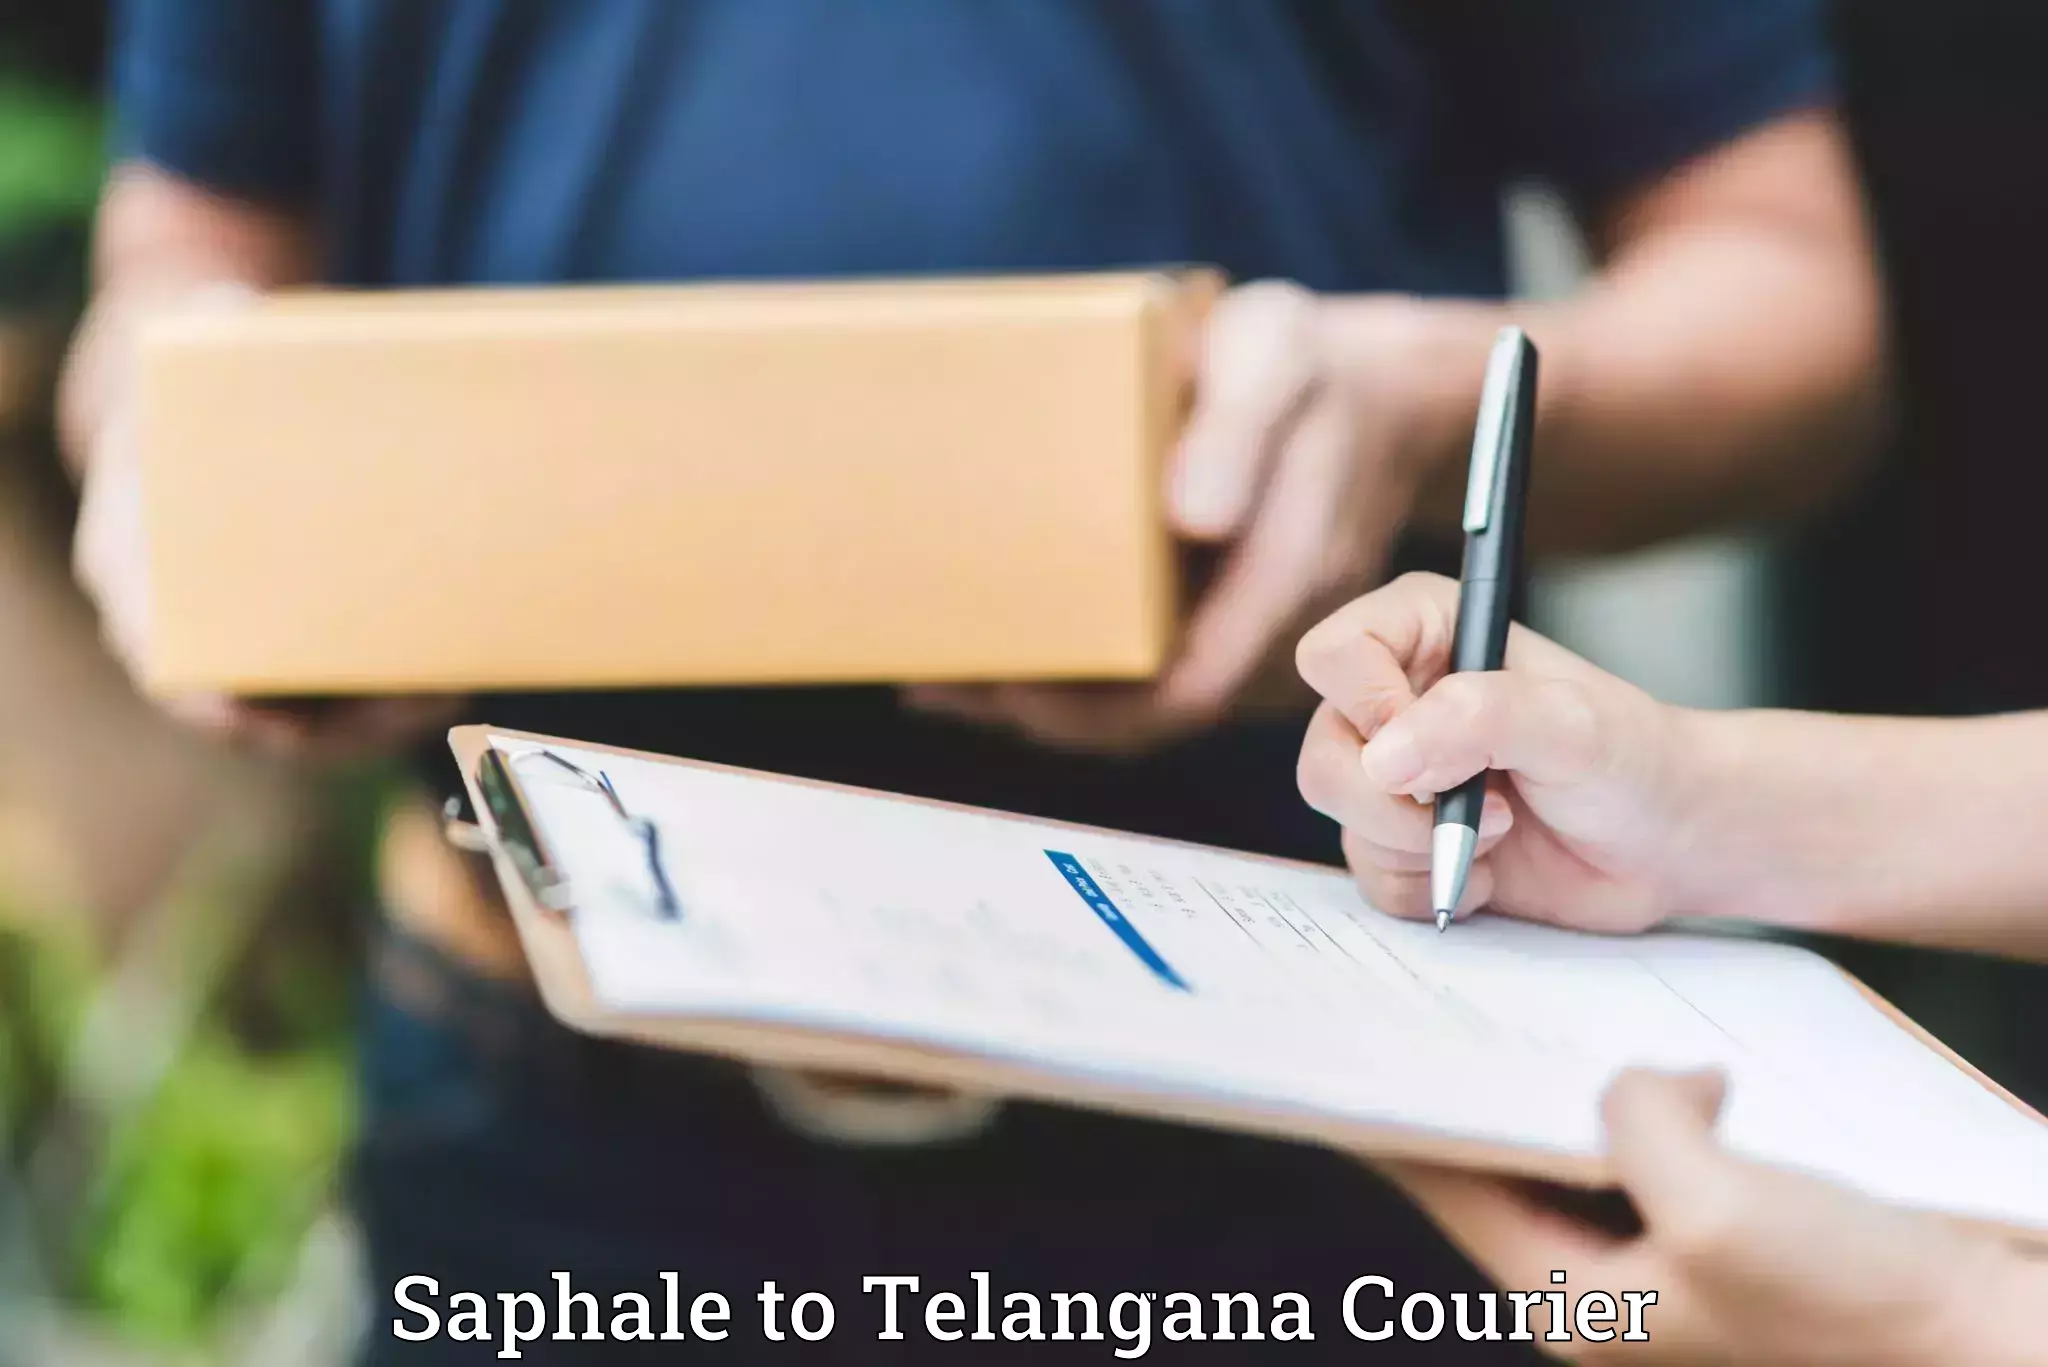 Luggage transport consulting in Saphale to Telangana